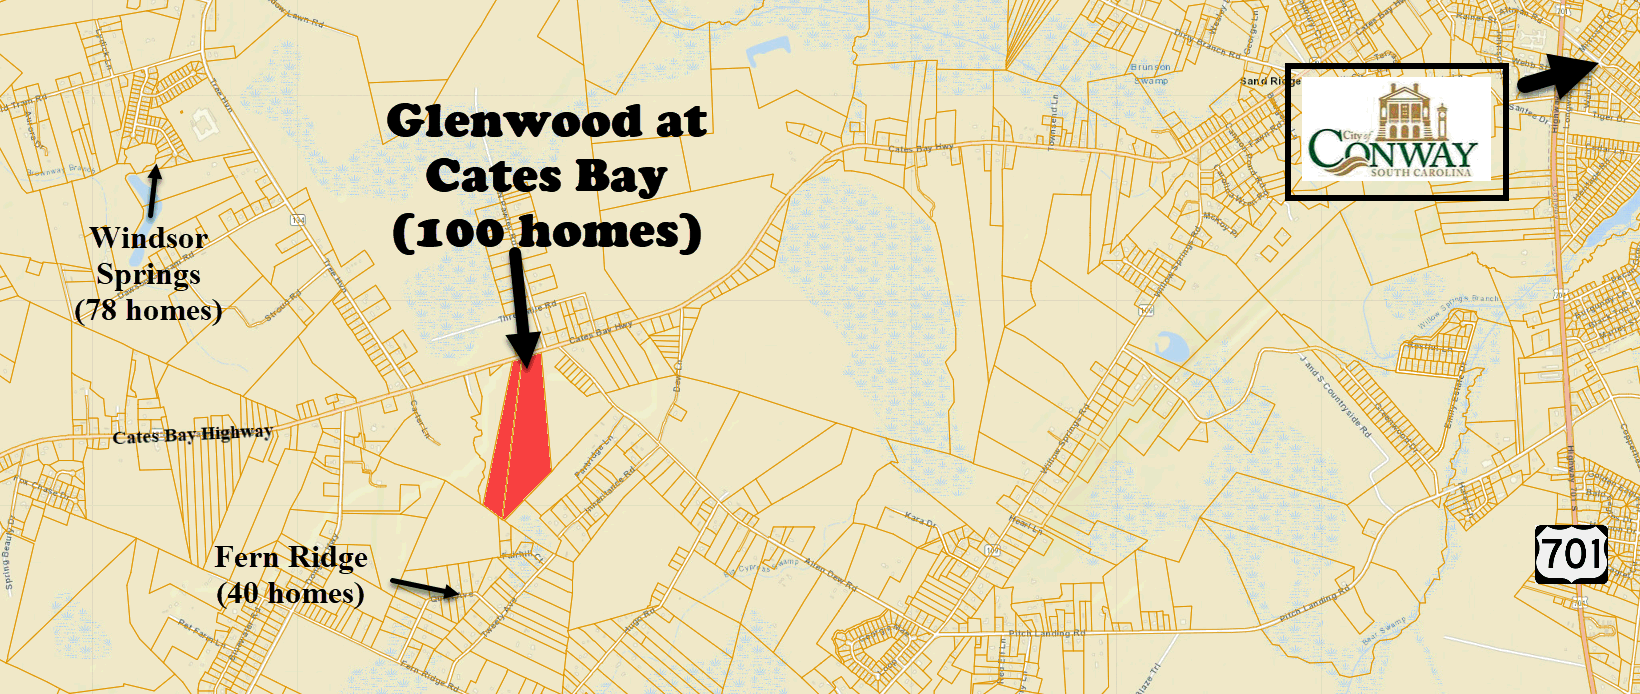 Glenwood at Cates Bay new home community in Conway